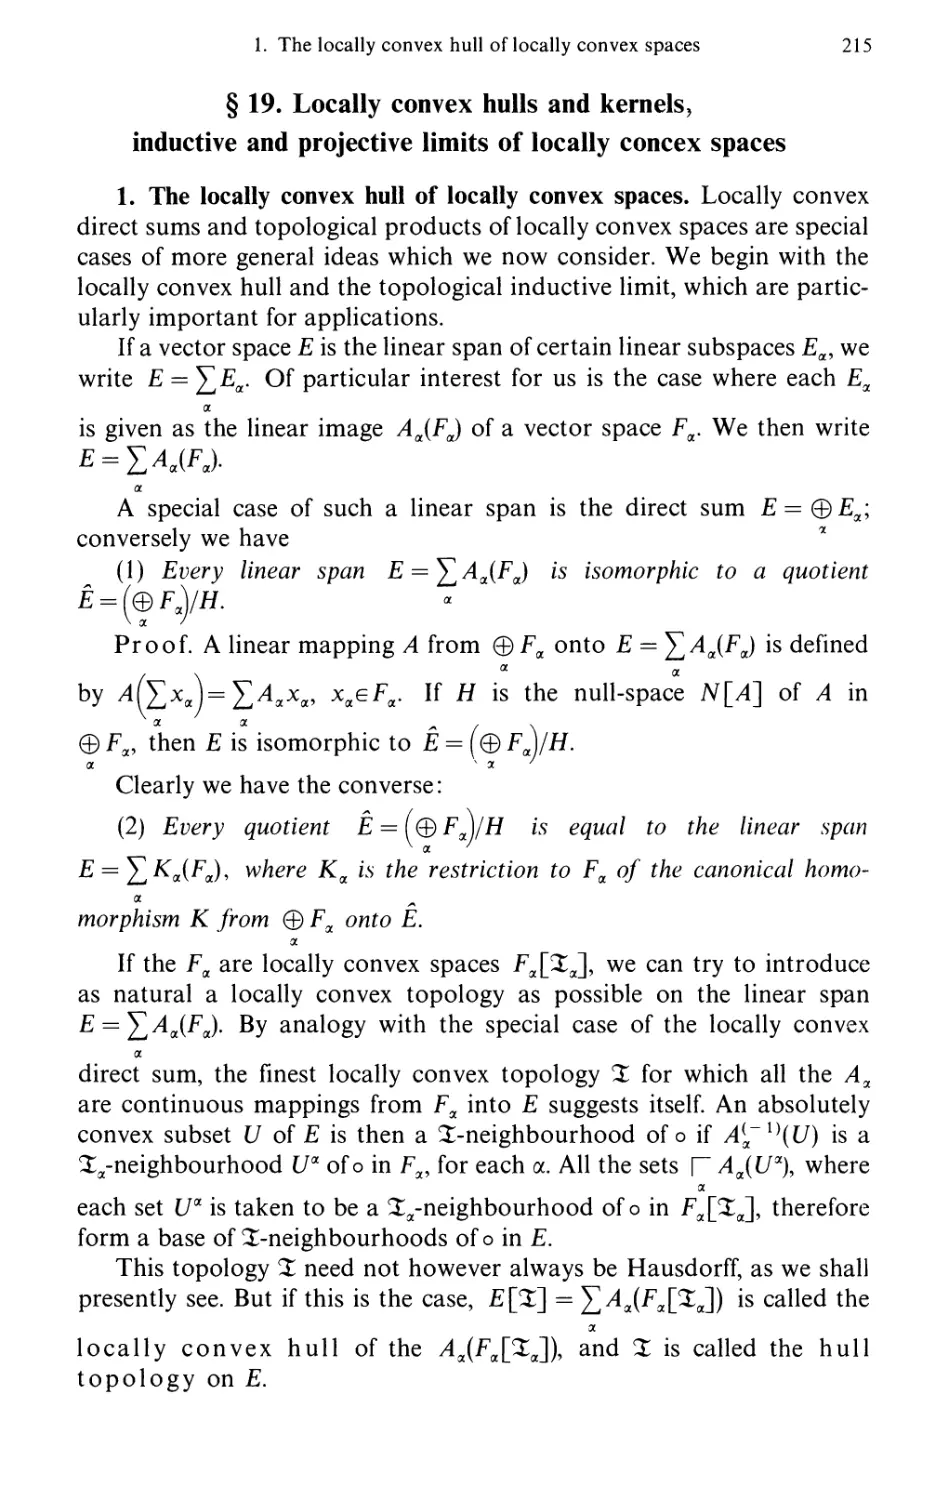 §19. Locally convex hulls and kernels, inductive and projective limits of locally convex spaces